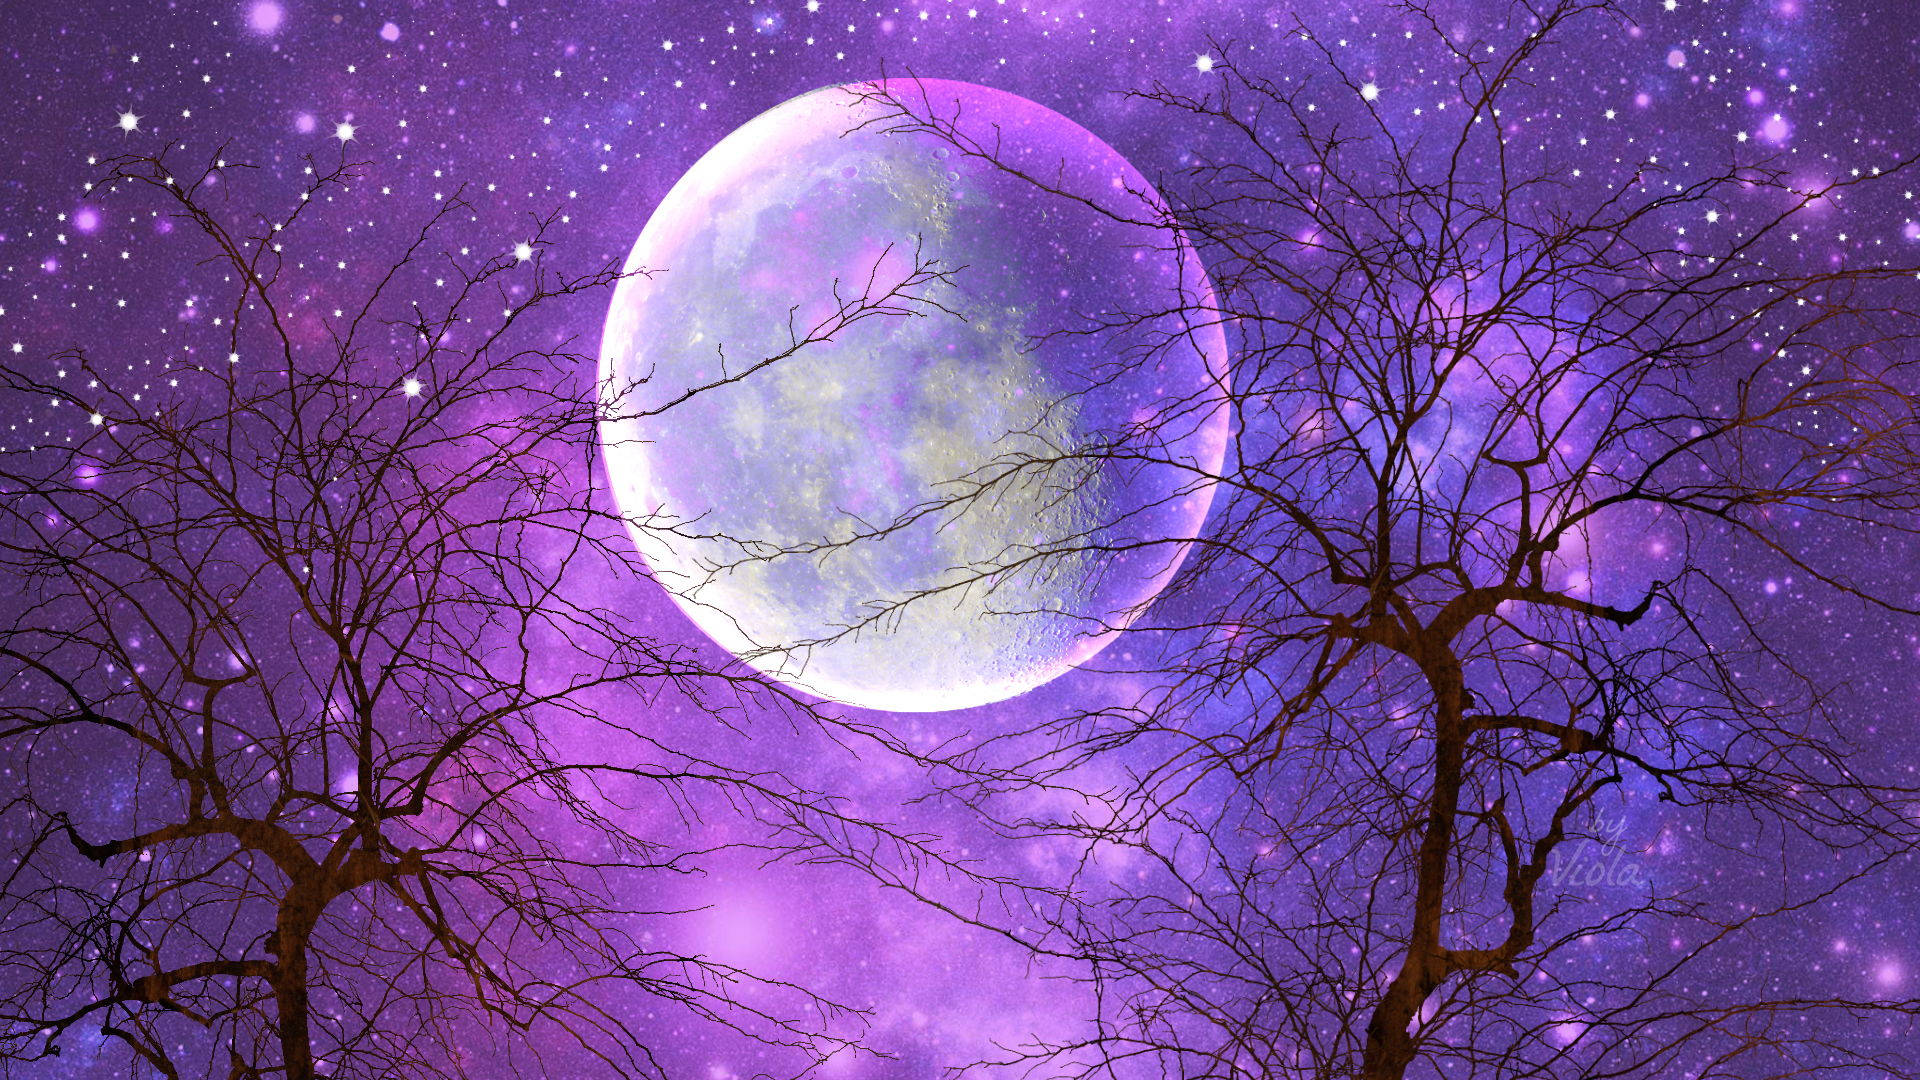 Moon Night Sky Wallpaper for FREE